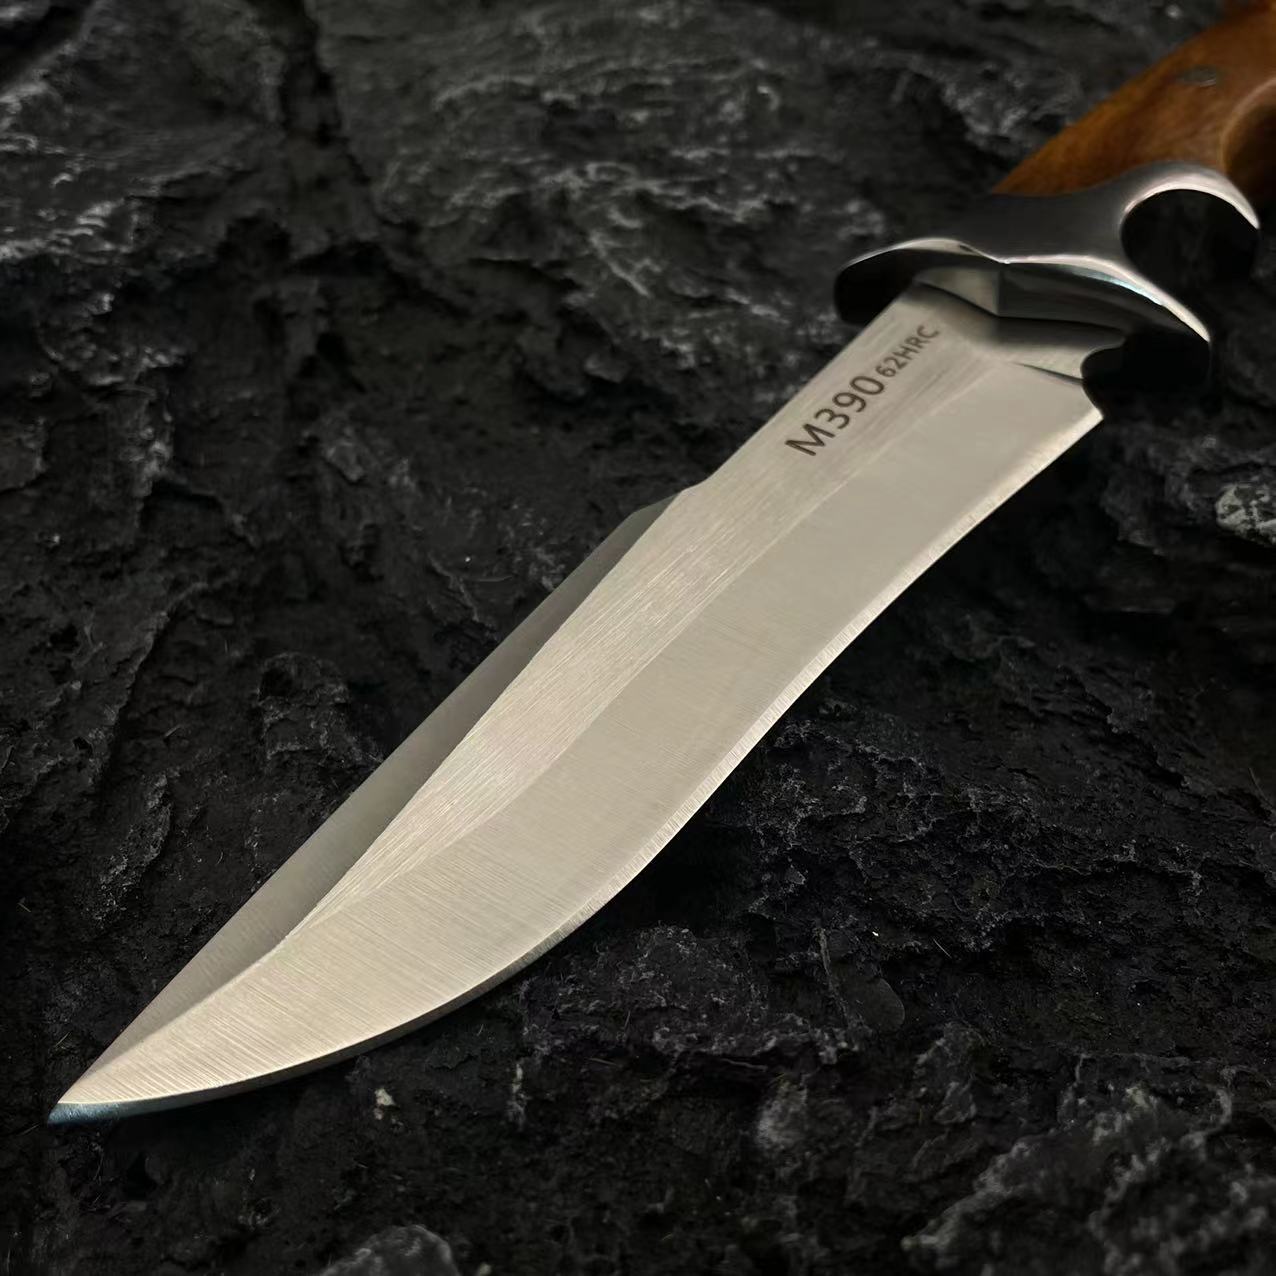 High Quality Straight Knife Fixed Blade Knife D2 Steel Satin Blade Wooden+Steel Handle Outdoor Survival Straight Hunting Knife & Leath Sheath